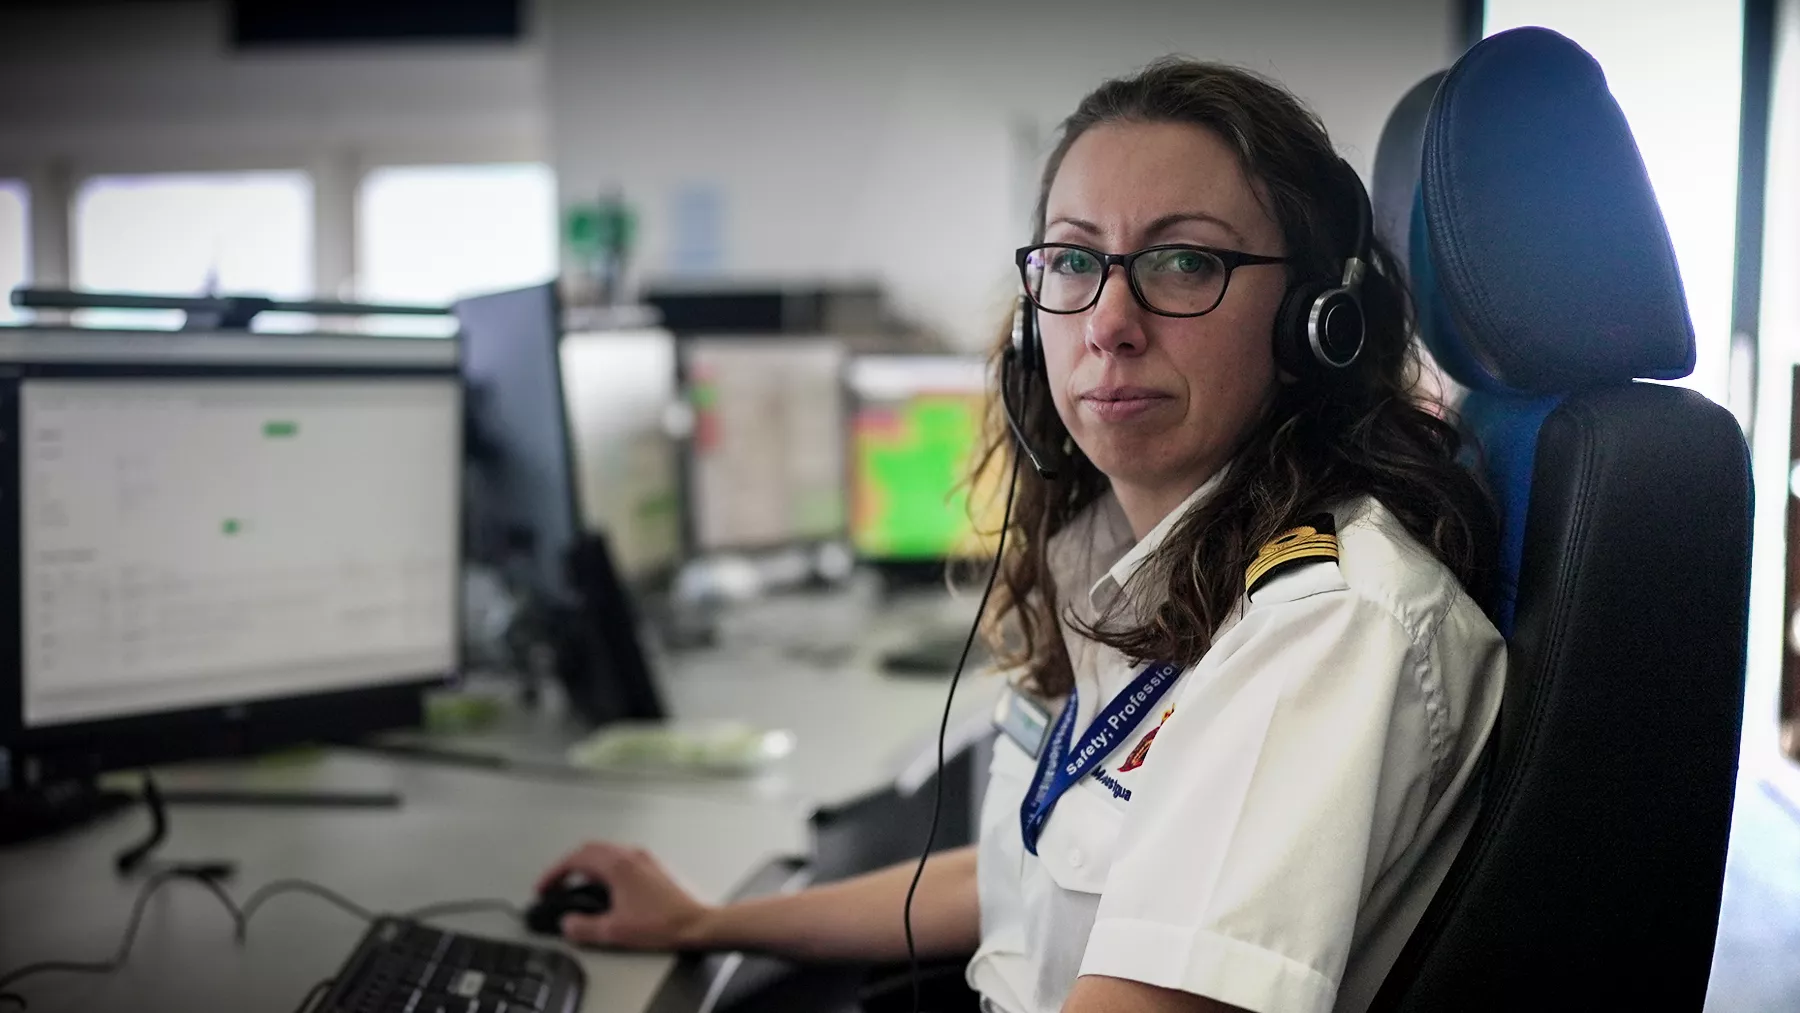 A female maritime operations team leader sits at a desk wearing a headset